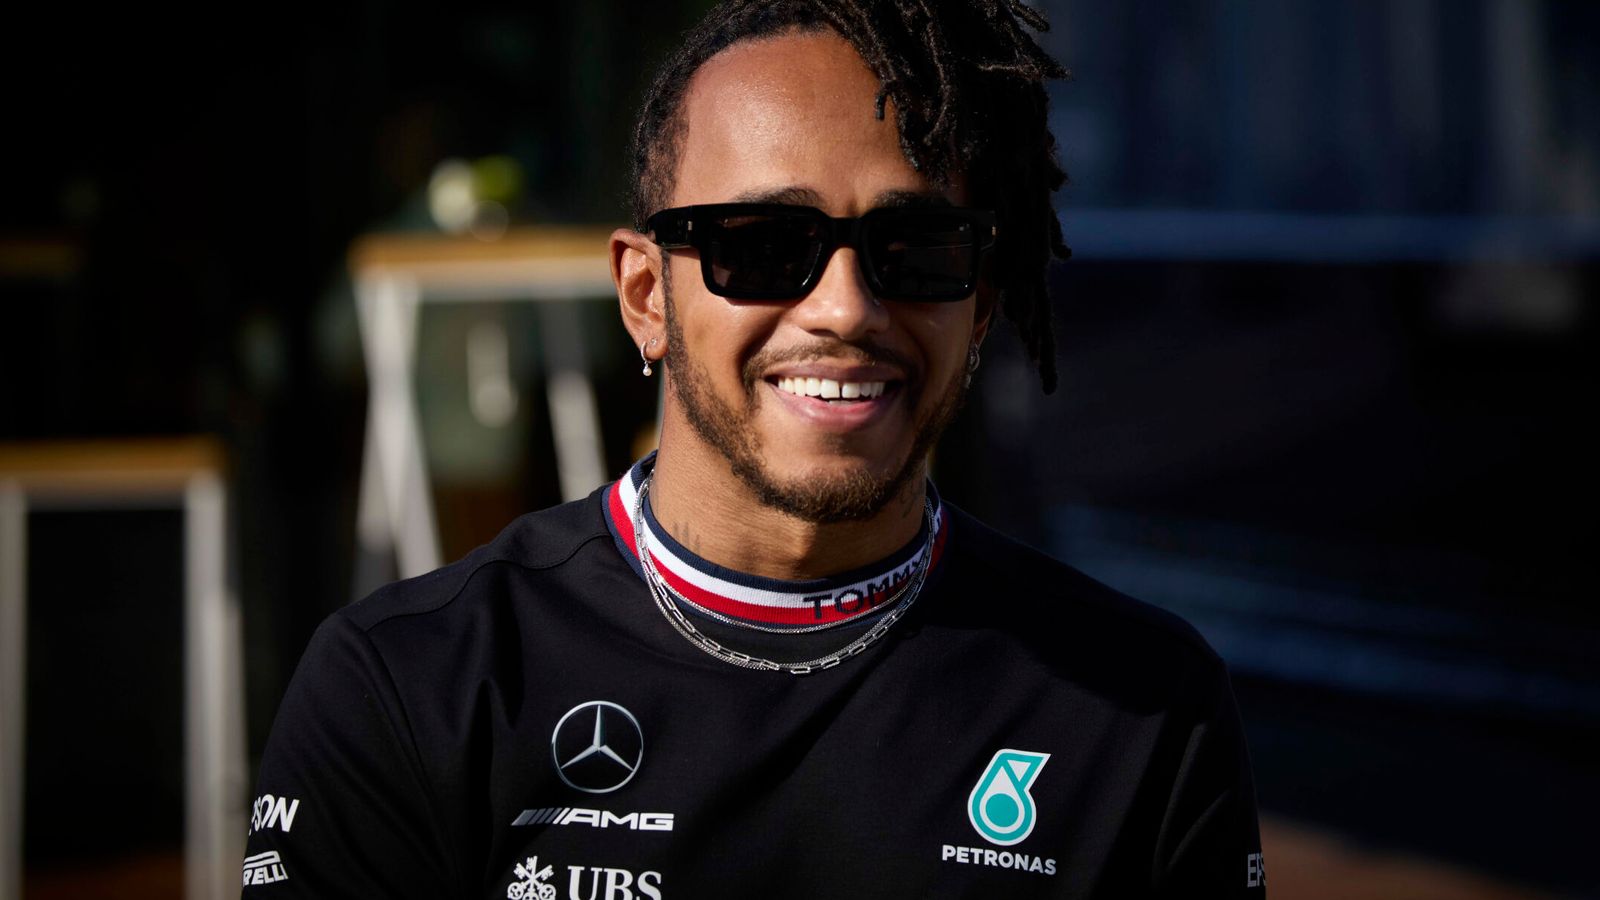 Hamilton to take 10-place grid penalty with new engine thumbnail